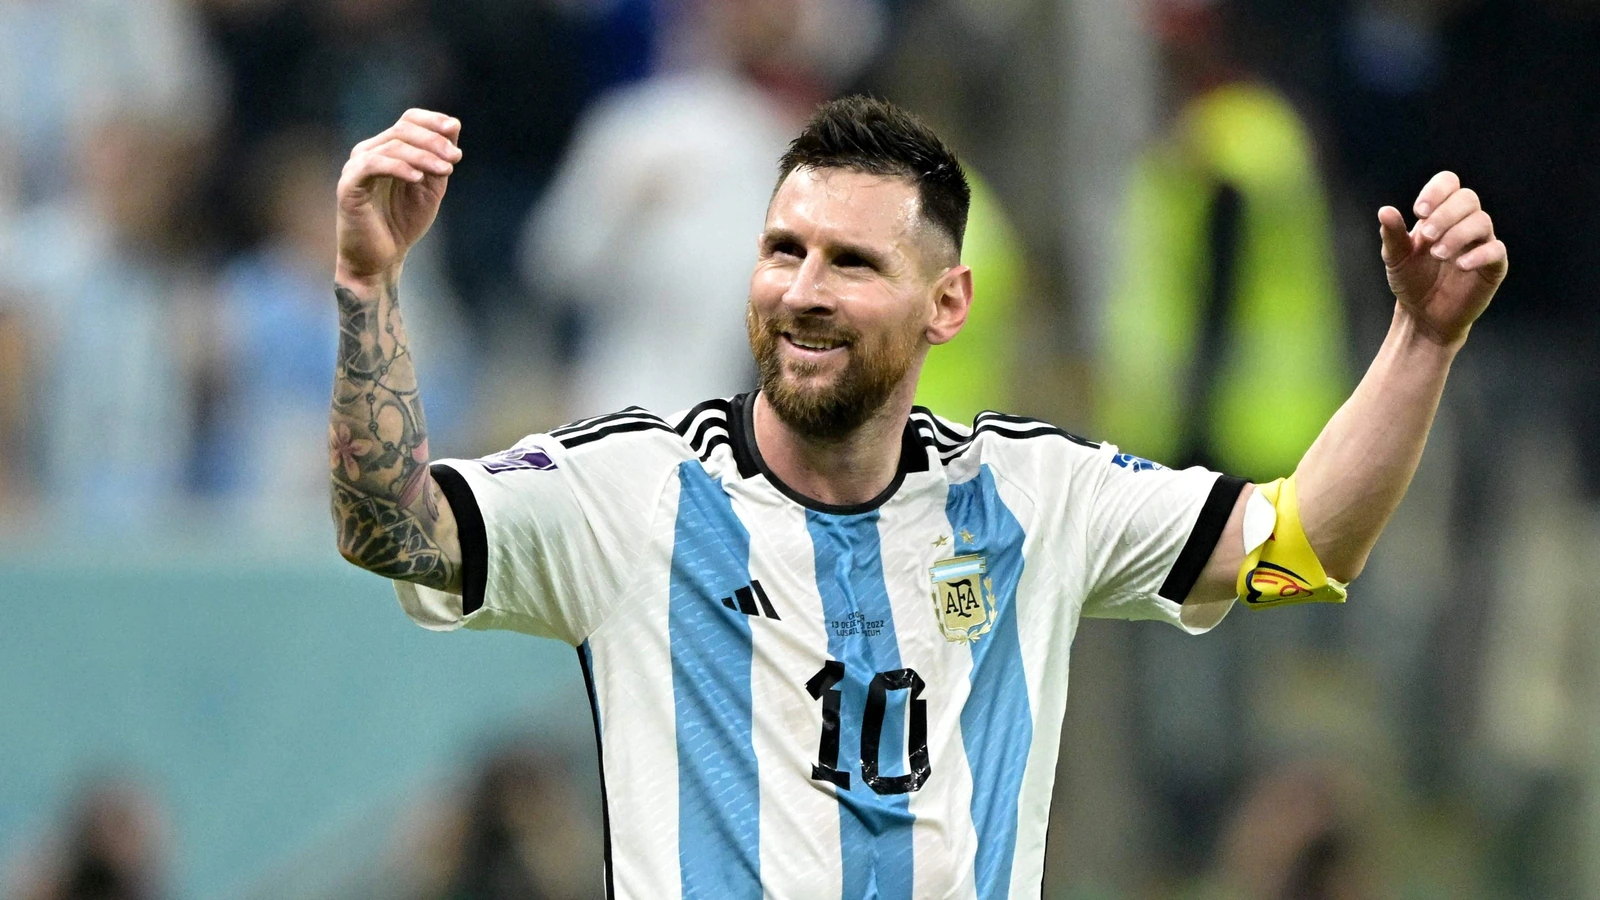 Lionel Messi the GOAT - Leads his country Argentina to lift the 2022 World Cup in Qatar